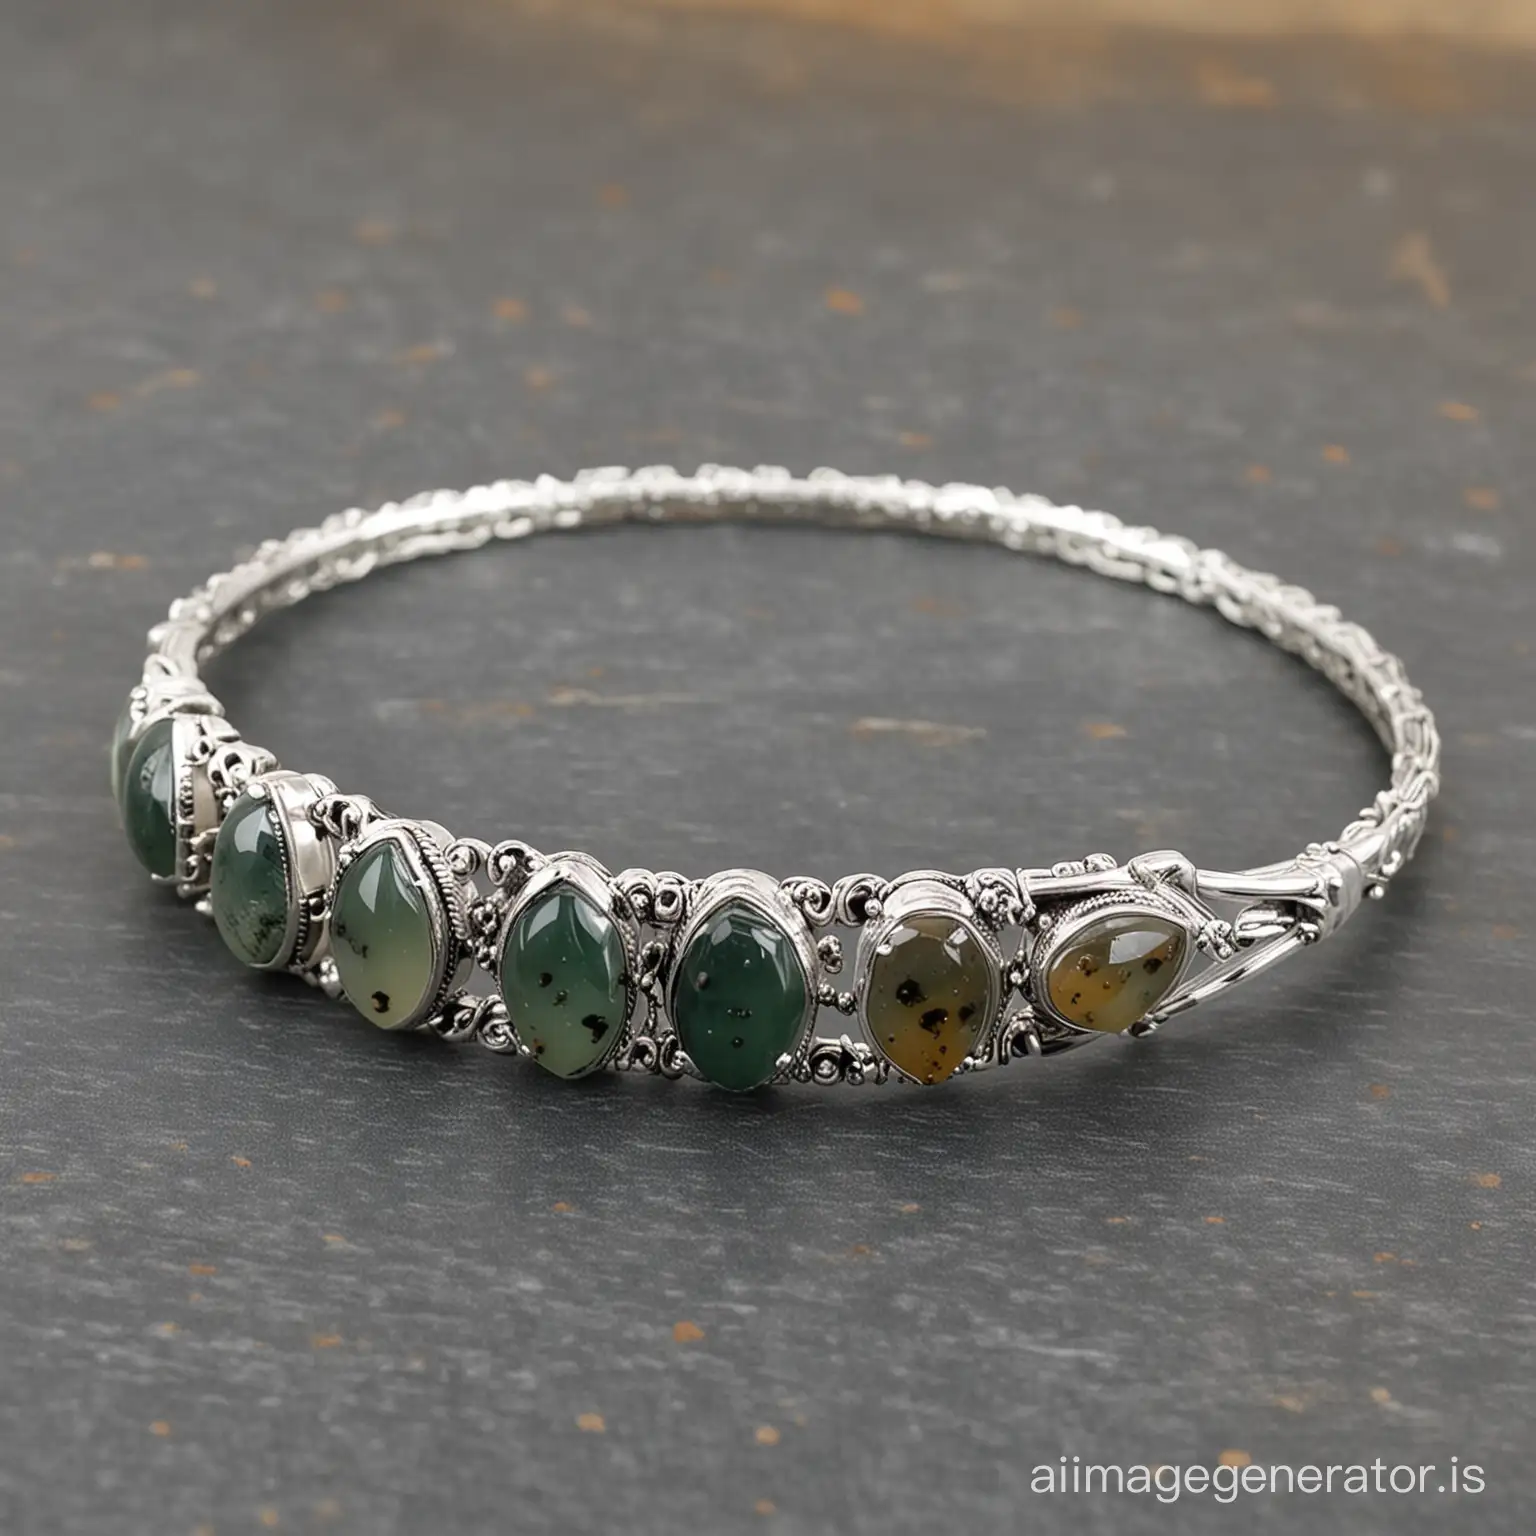 Bracelet, Moss Agate Bangle, harvest-witch inspired silver bangle with 7 marquise moss agate gems.


